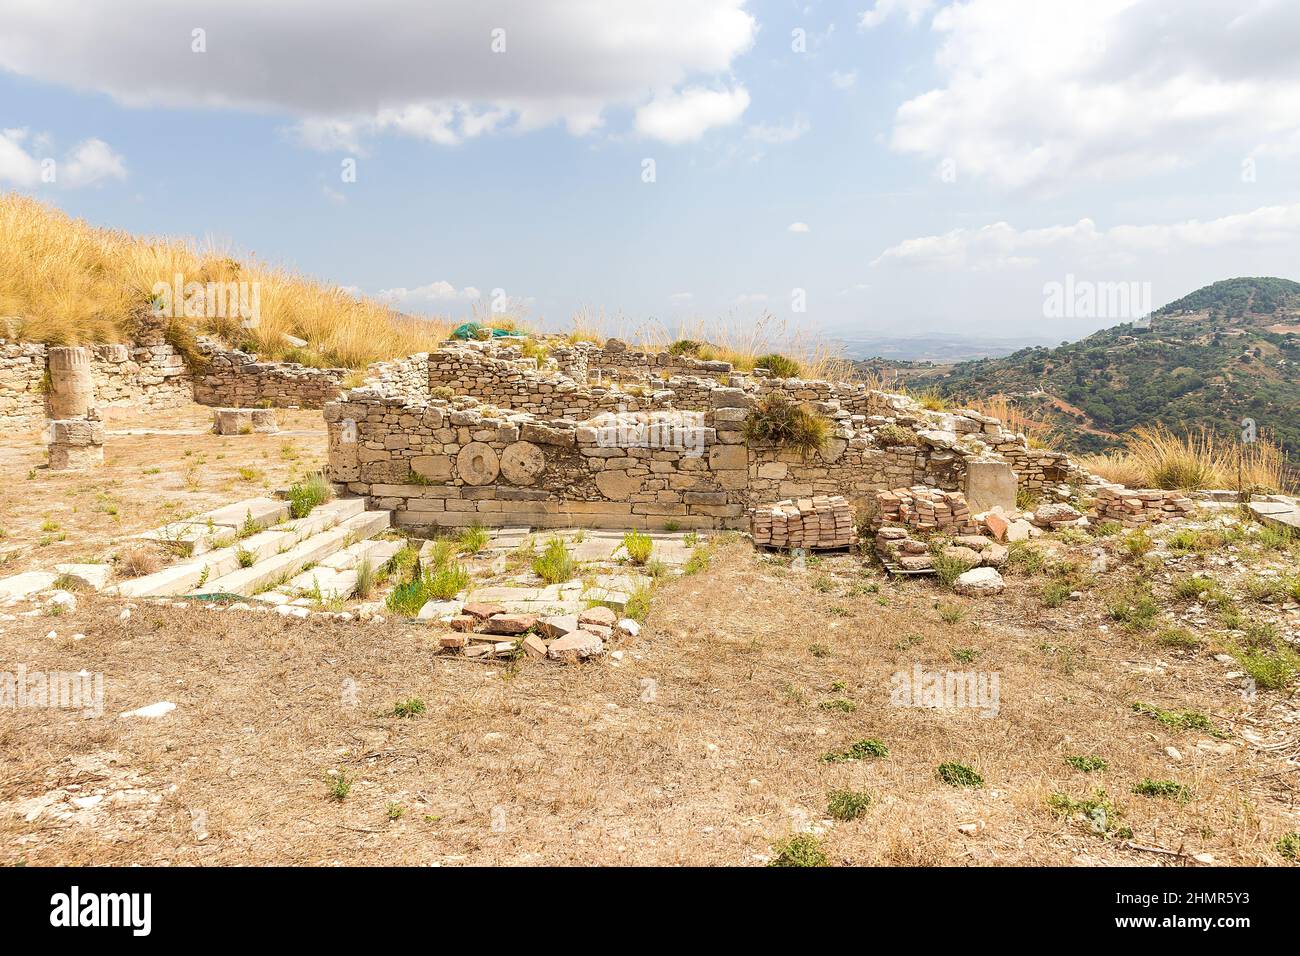 Sceneries of The Agora at Segesta Archaeological Park in Trapani, Sicily, Italy. Stock Photo